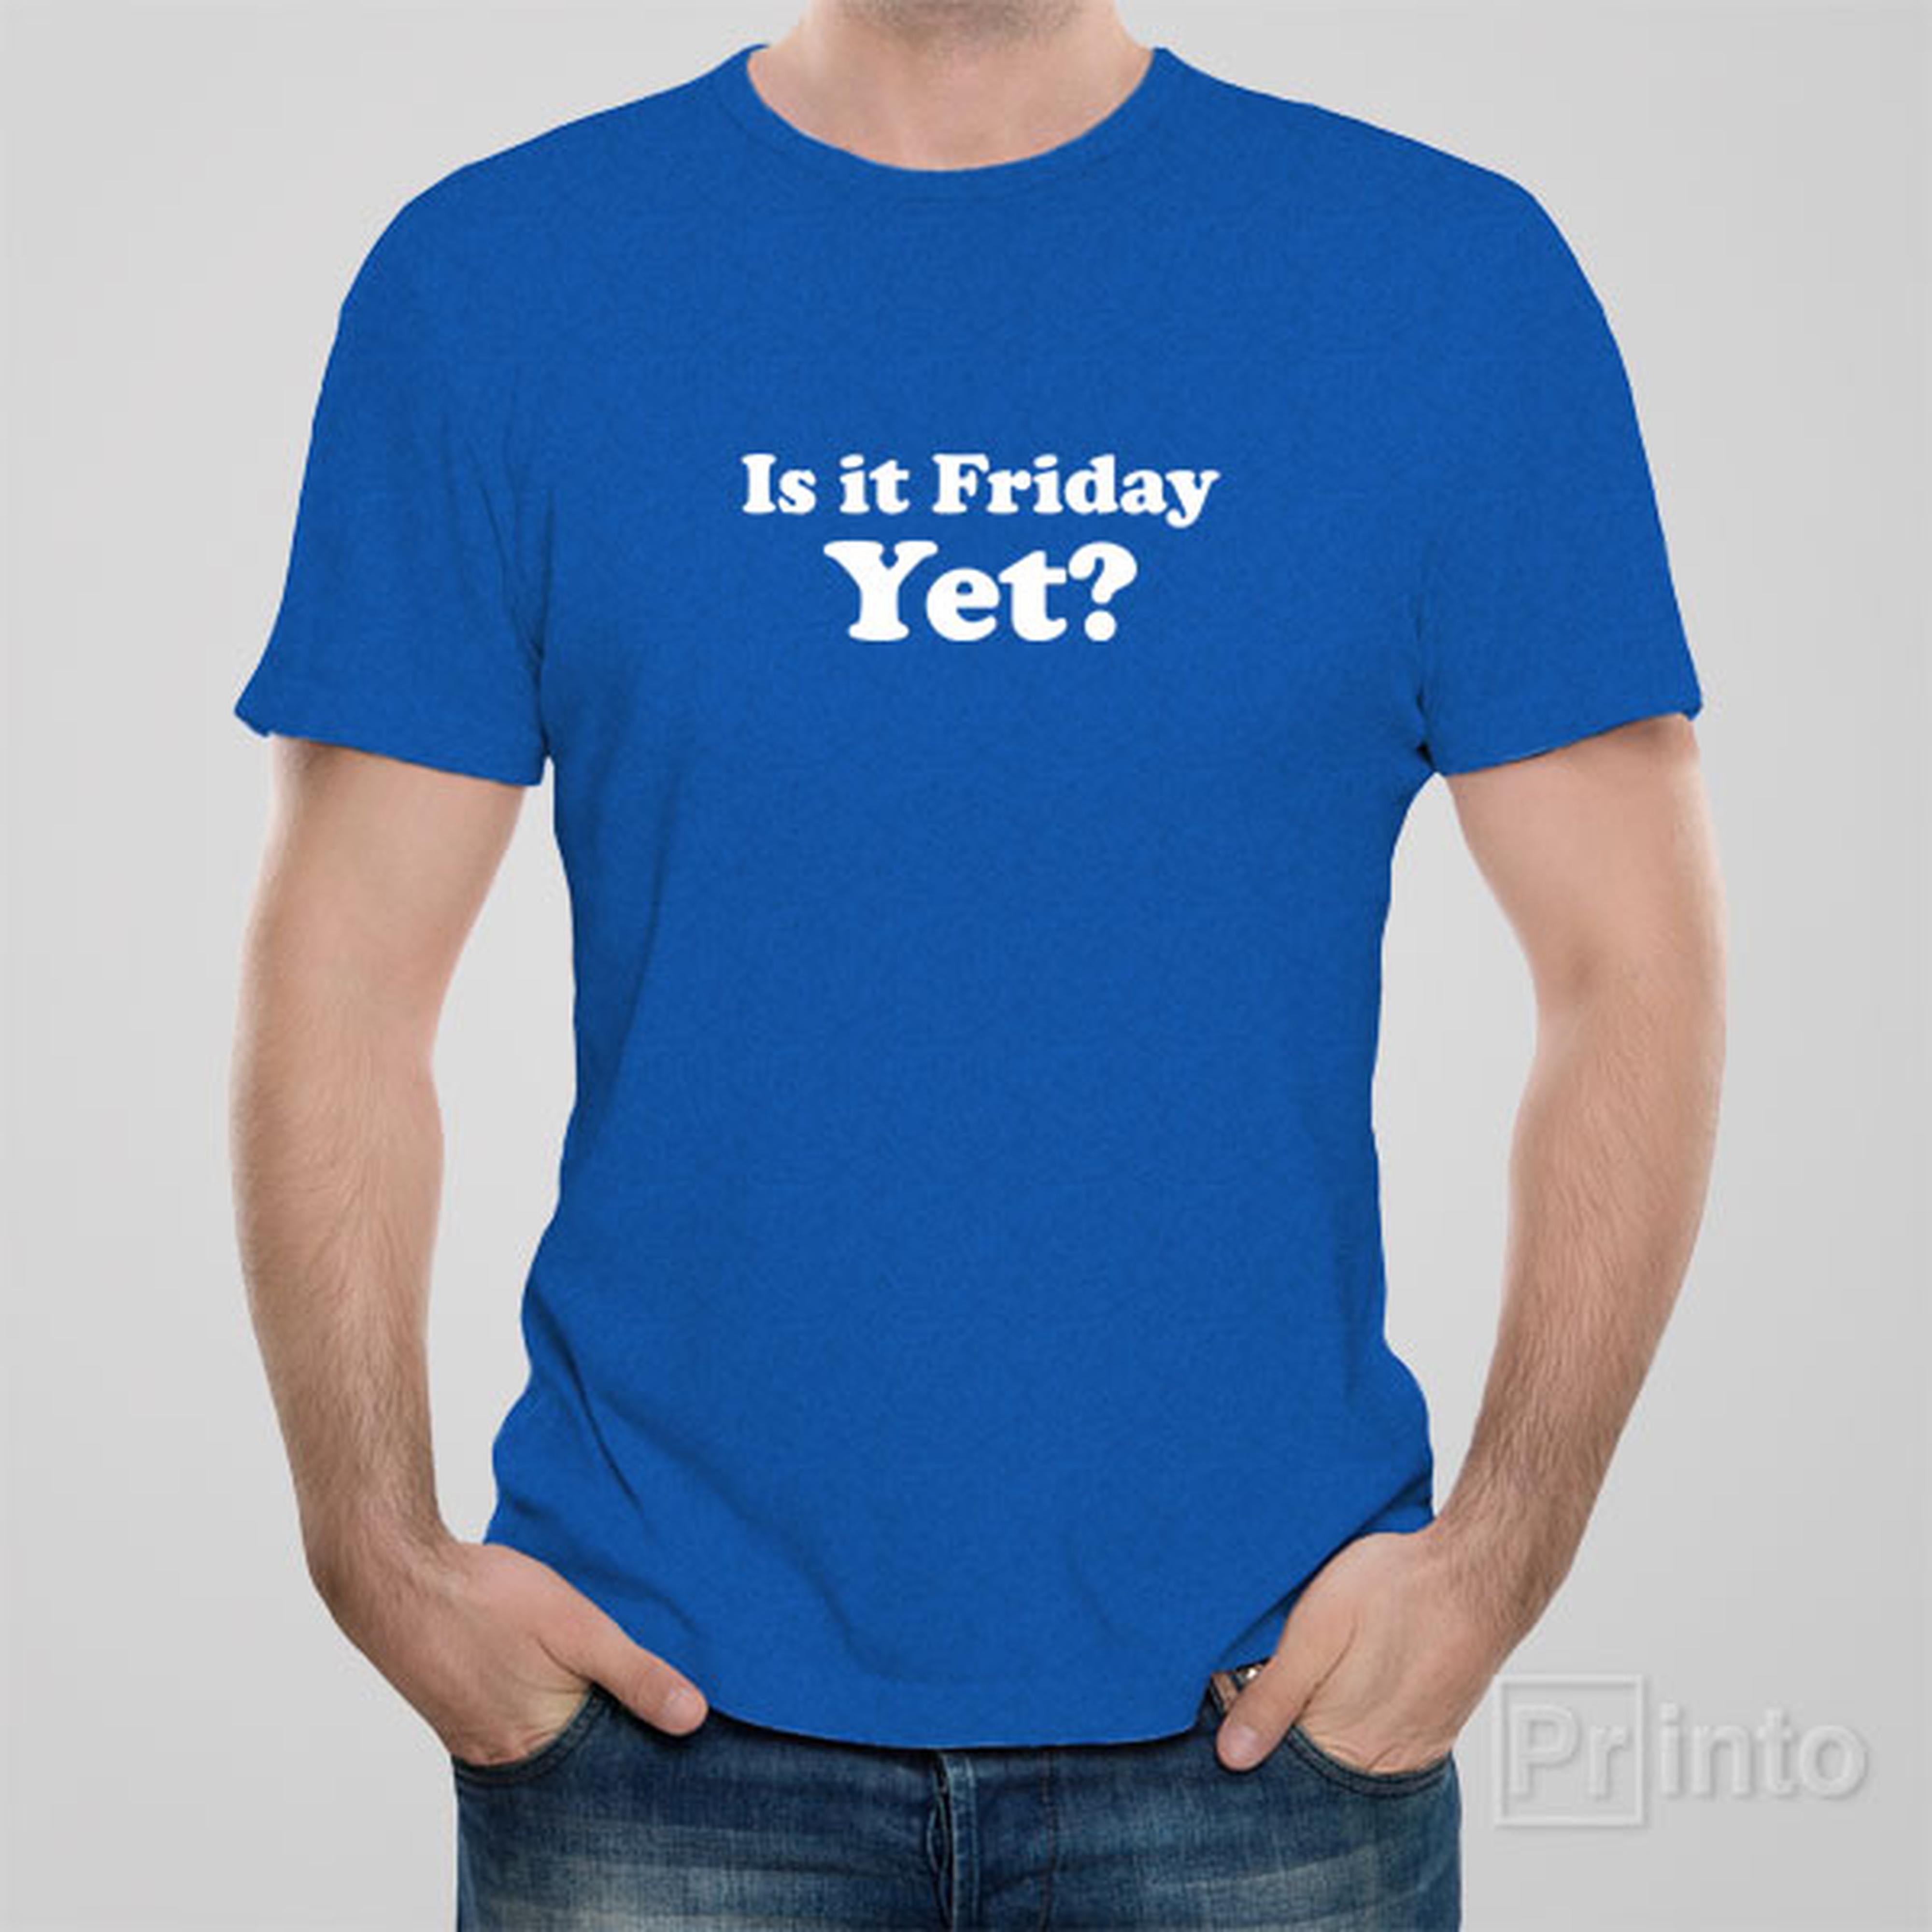 is-it-friday-yet-t-shirt